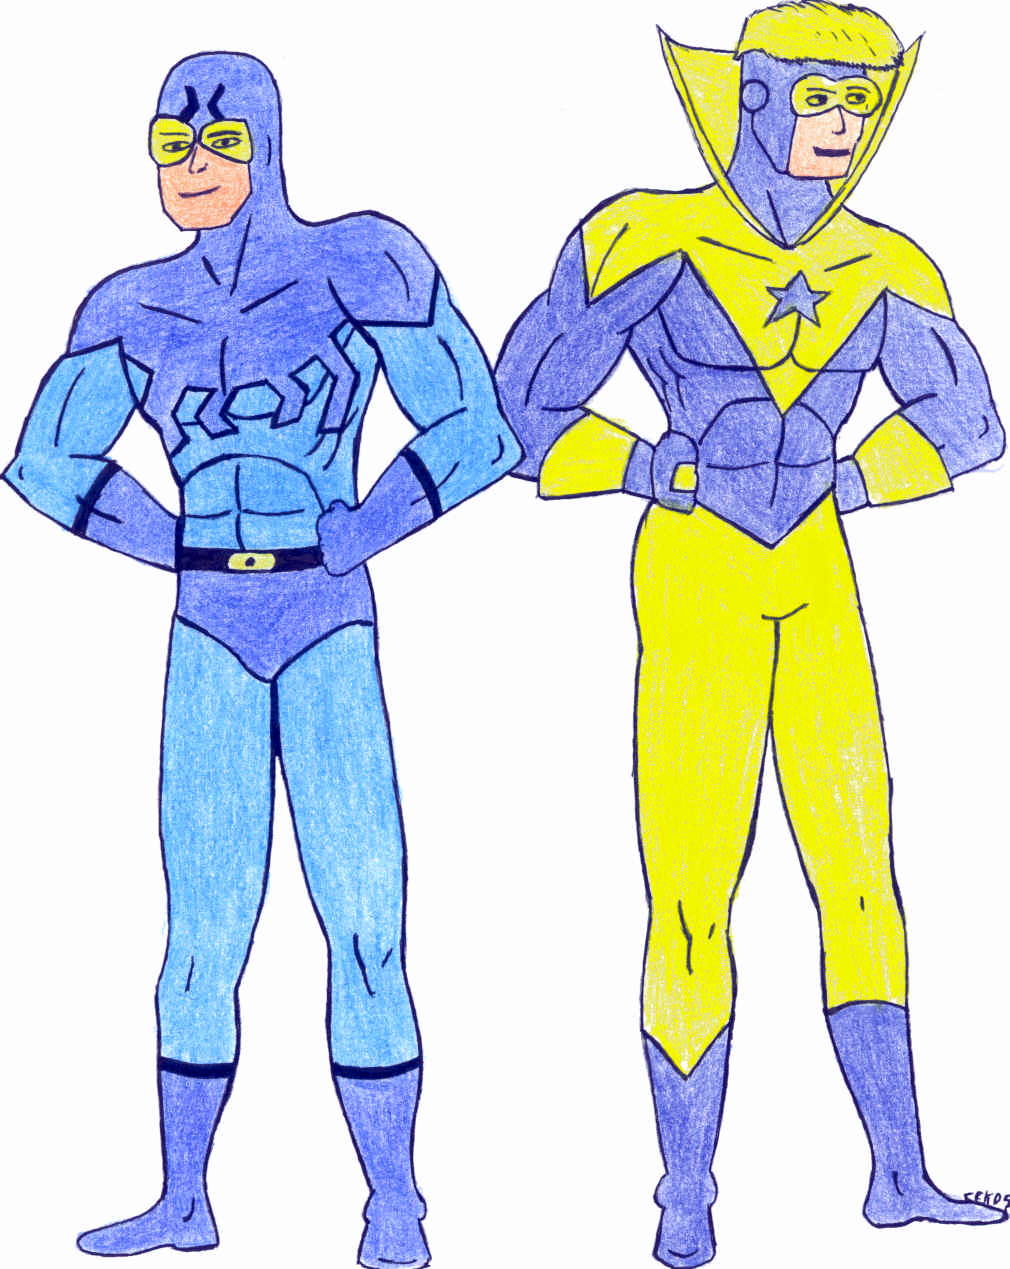 Blue Beetle and Booster Gold by calklais